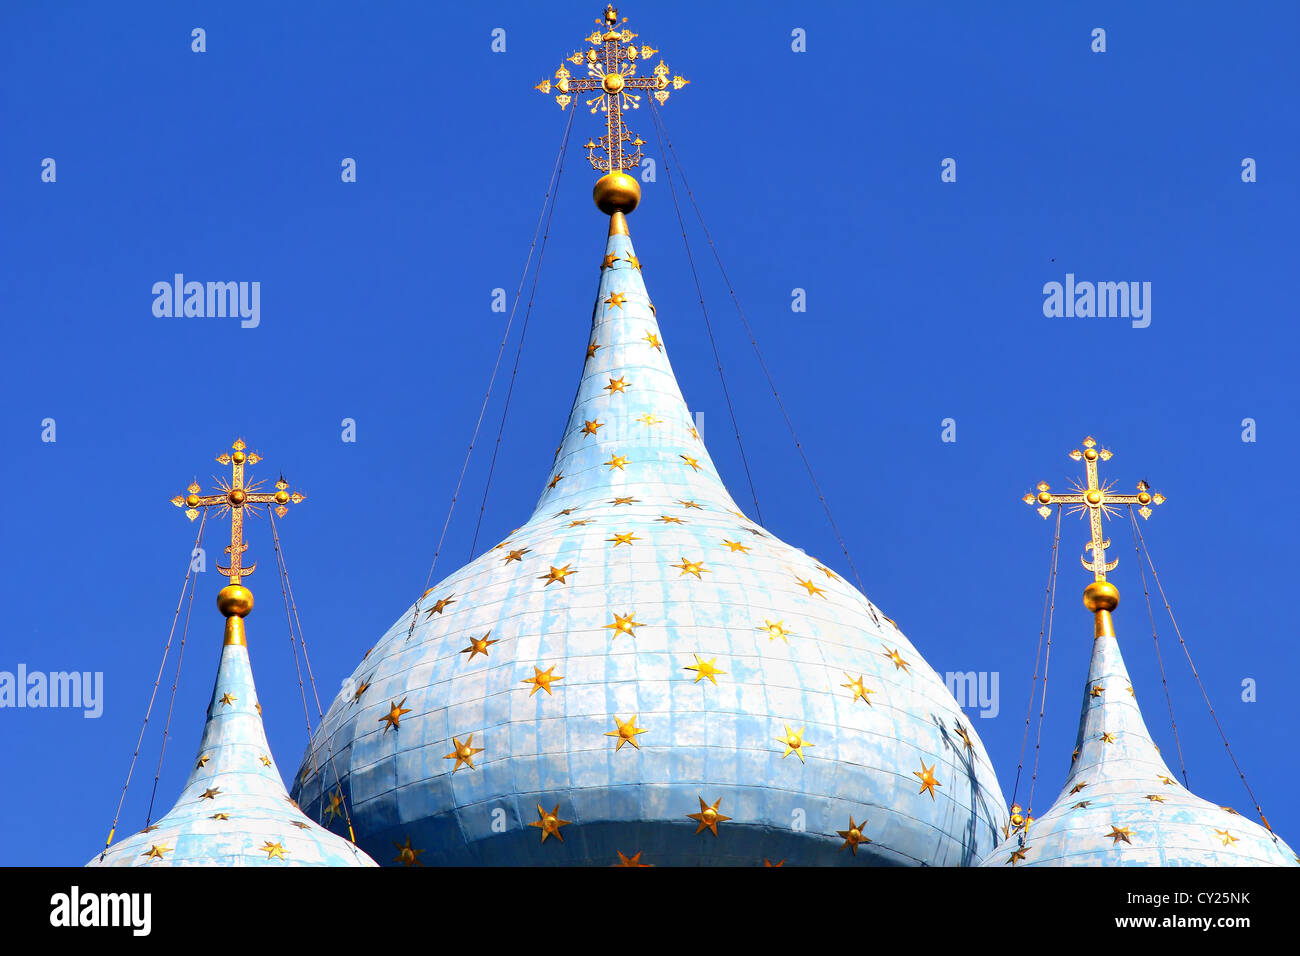 Blue church cupolas with golden stars and crosses Stock Photo